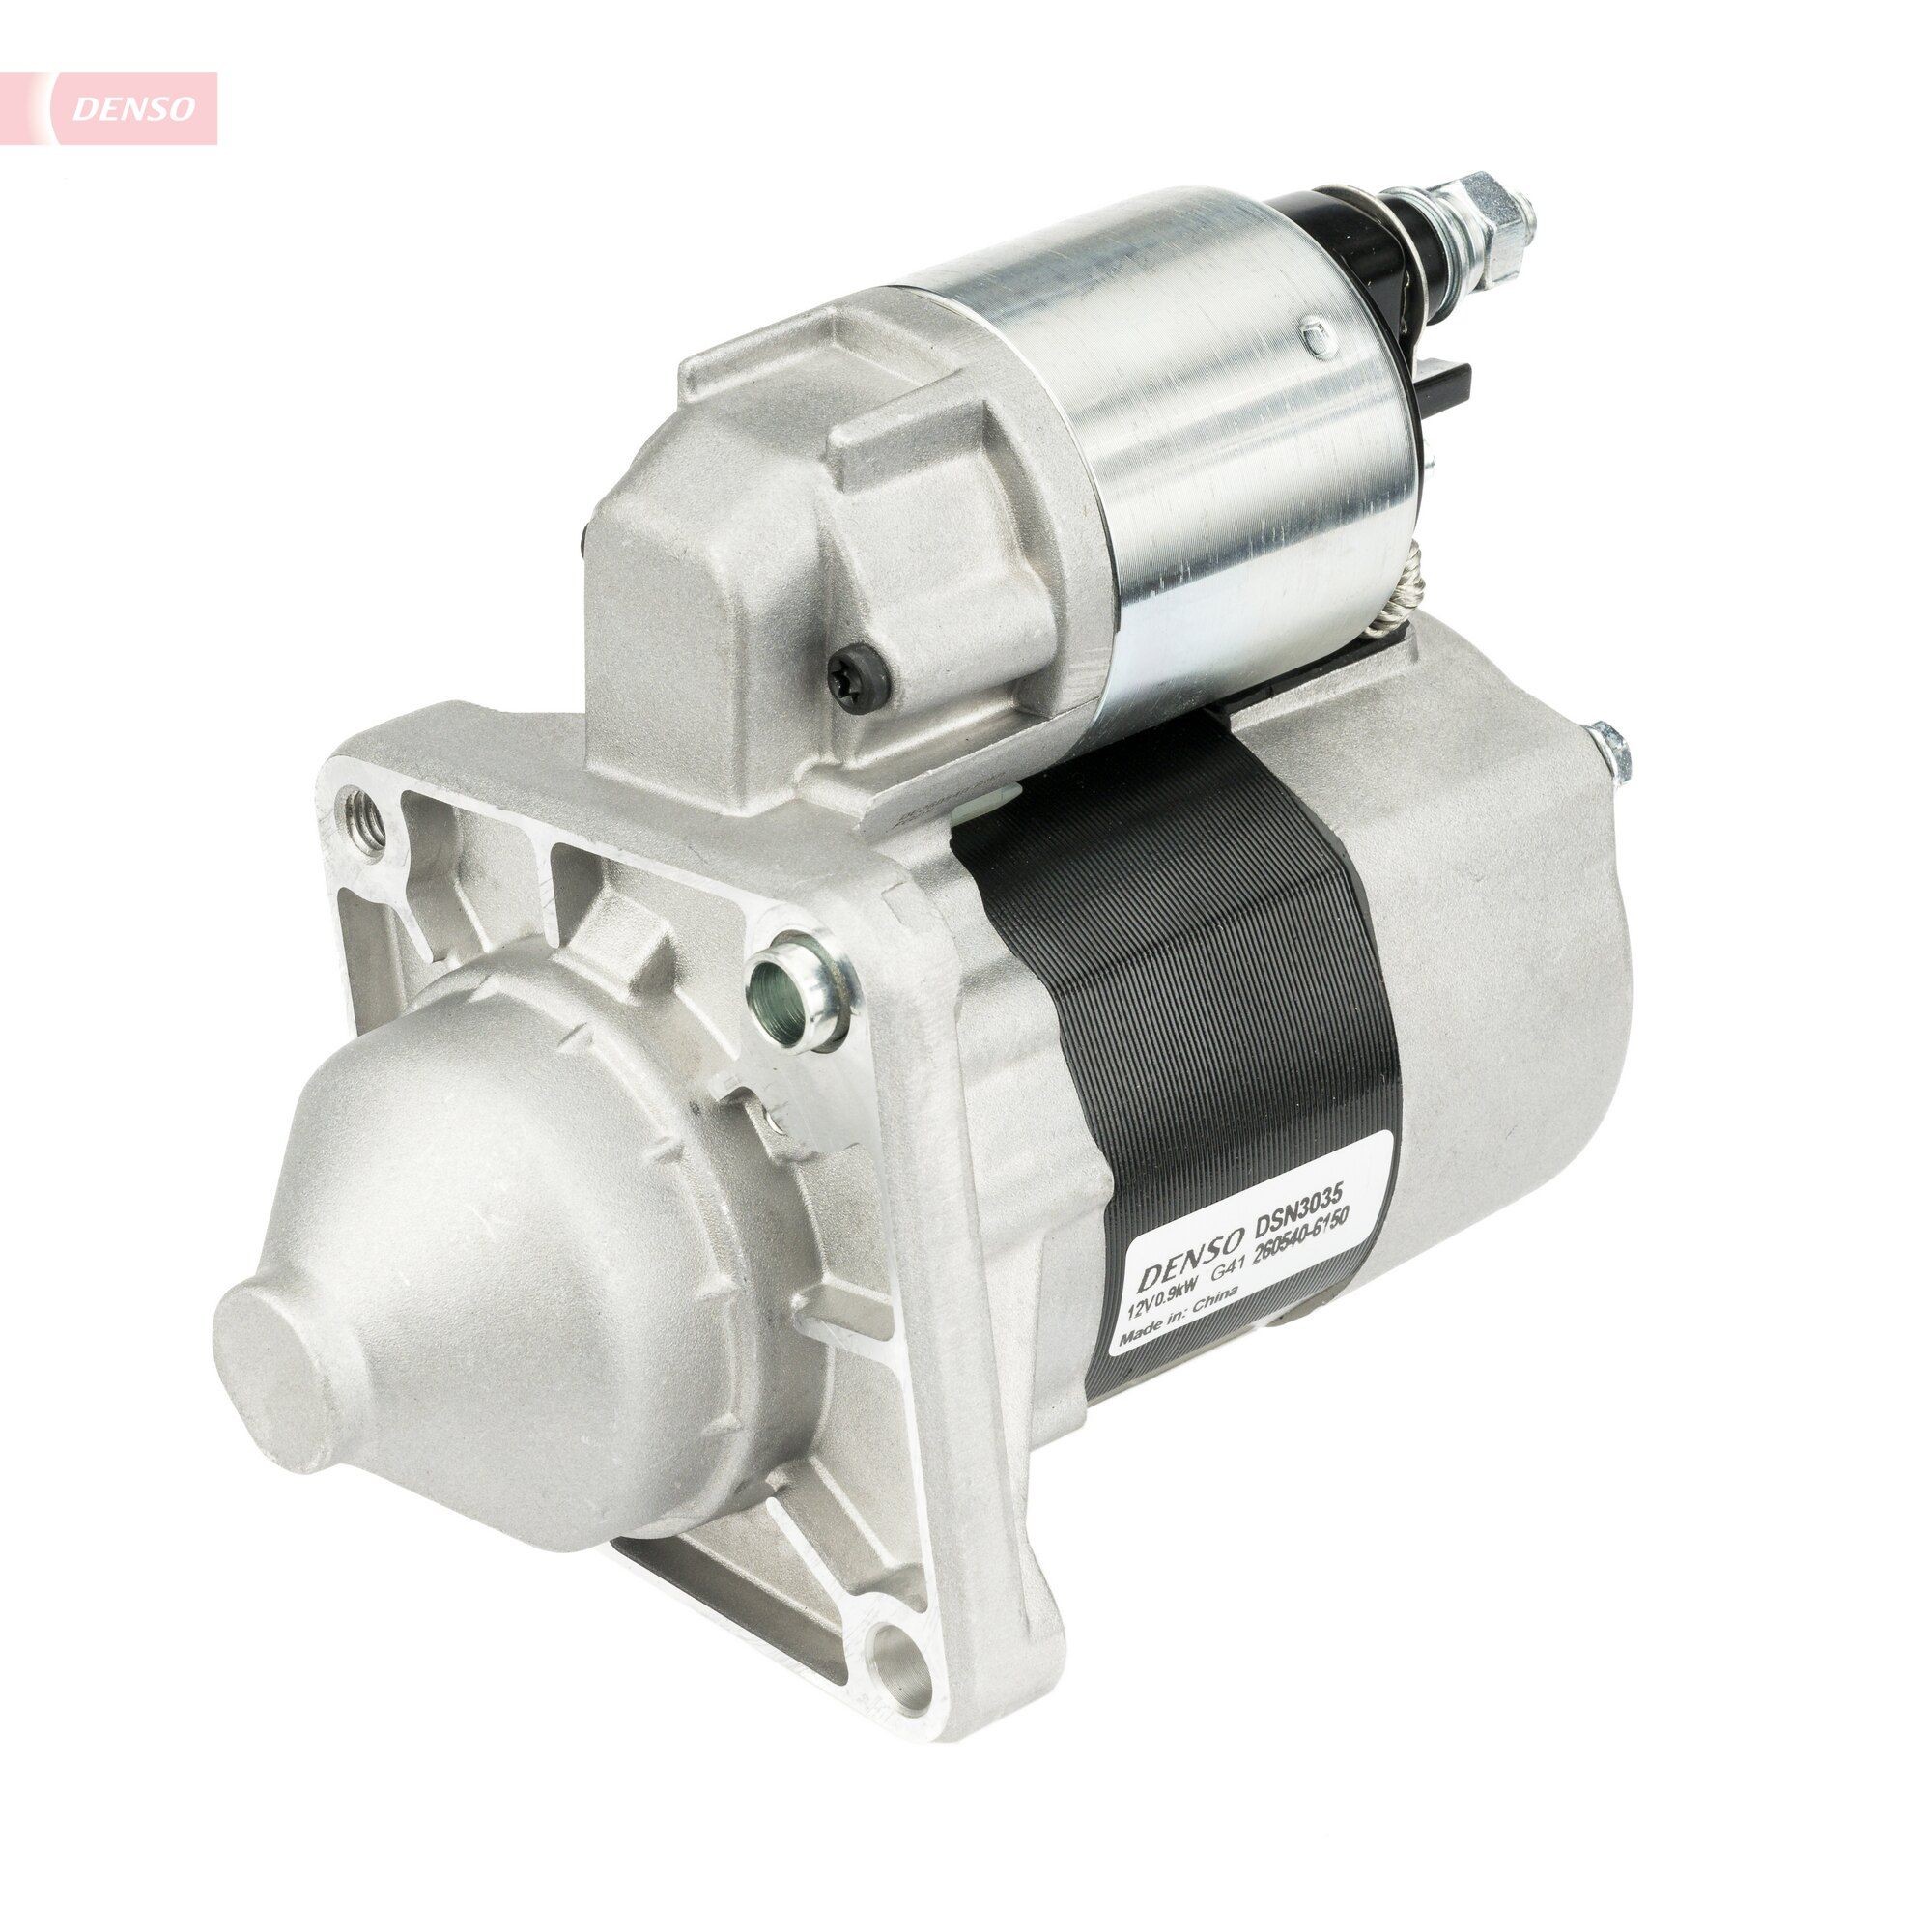 DENSO DSN3035 Starter motor FIAT experience and price